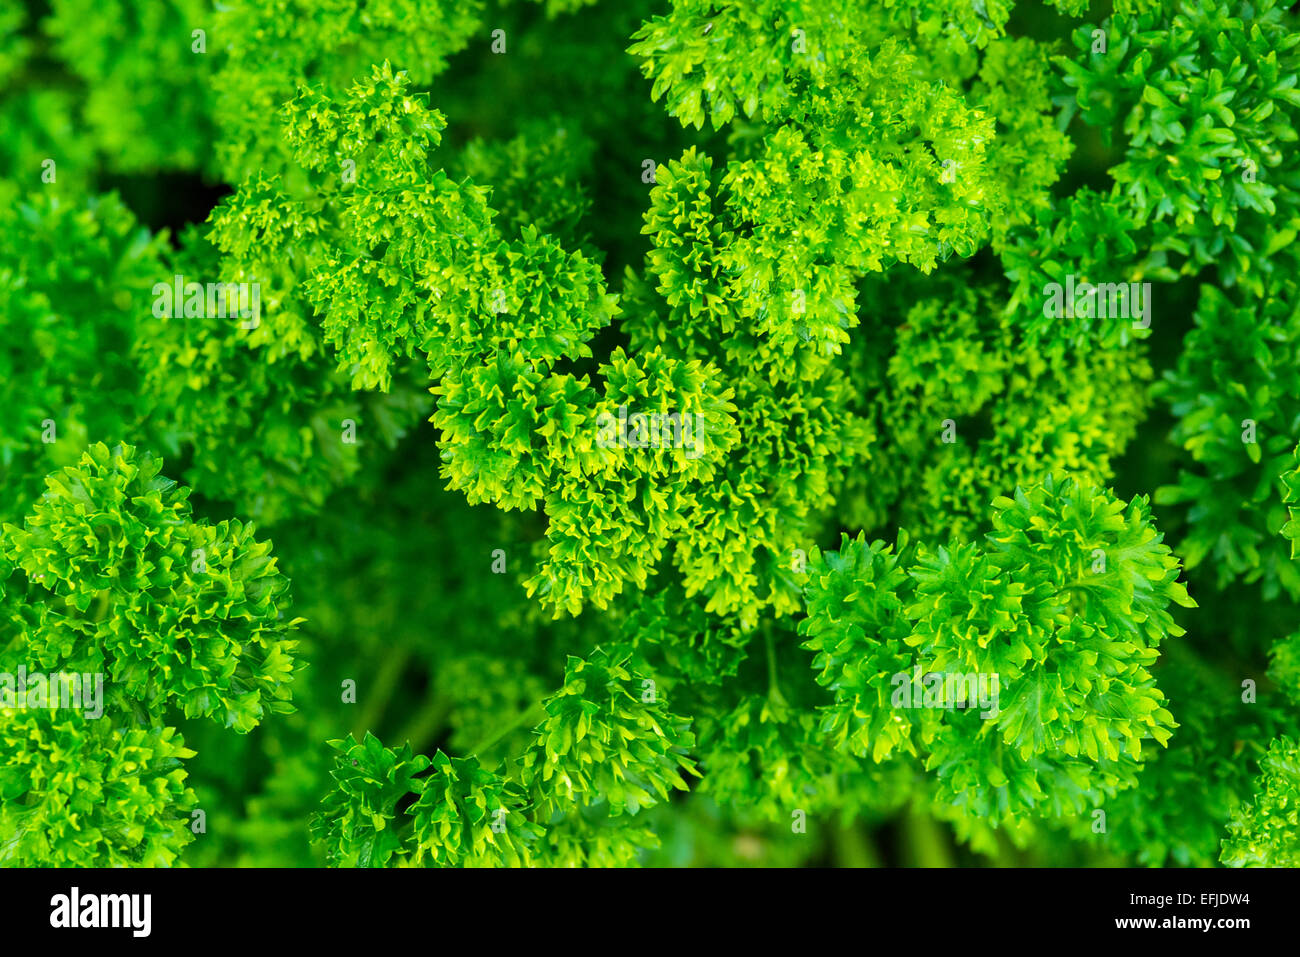 Parsley or garden parsley (Petroselinum crispum) is a species of Petroselinum in the family Apiaceae, native to the central Medi Stock Photo